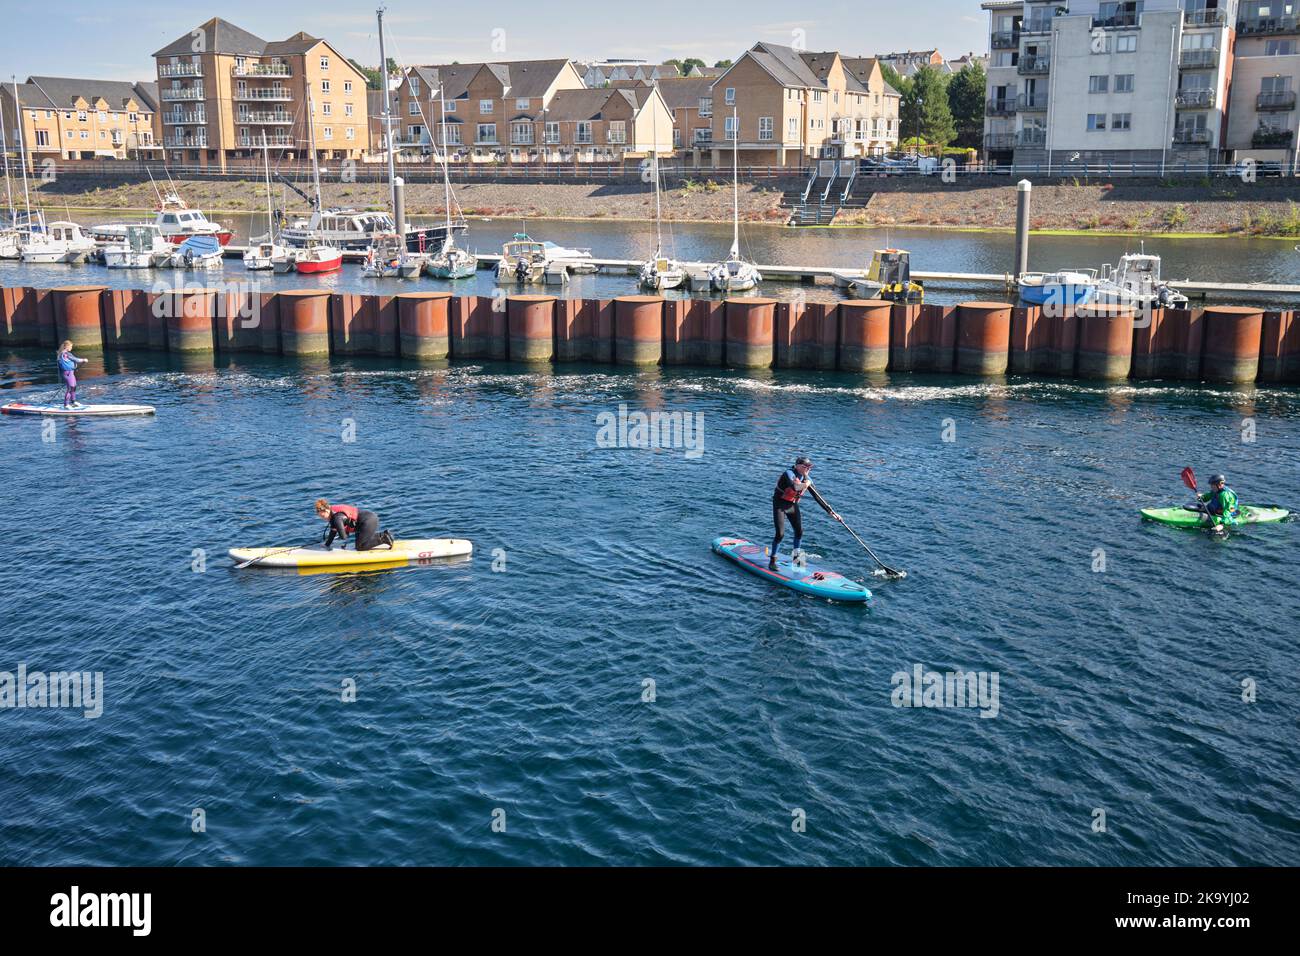 Cours de paddleboard au Cardiff International White Water Watersports Centre Cardiff South Wales UK Banque D'Images